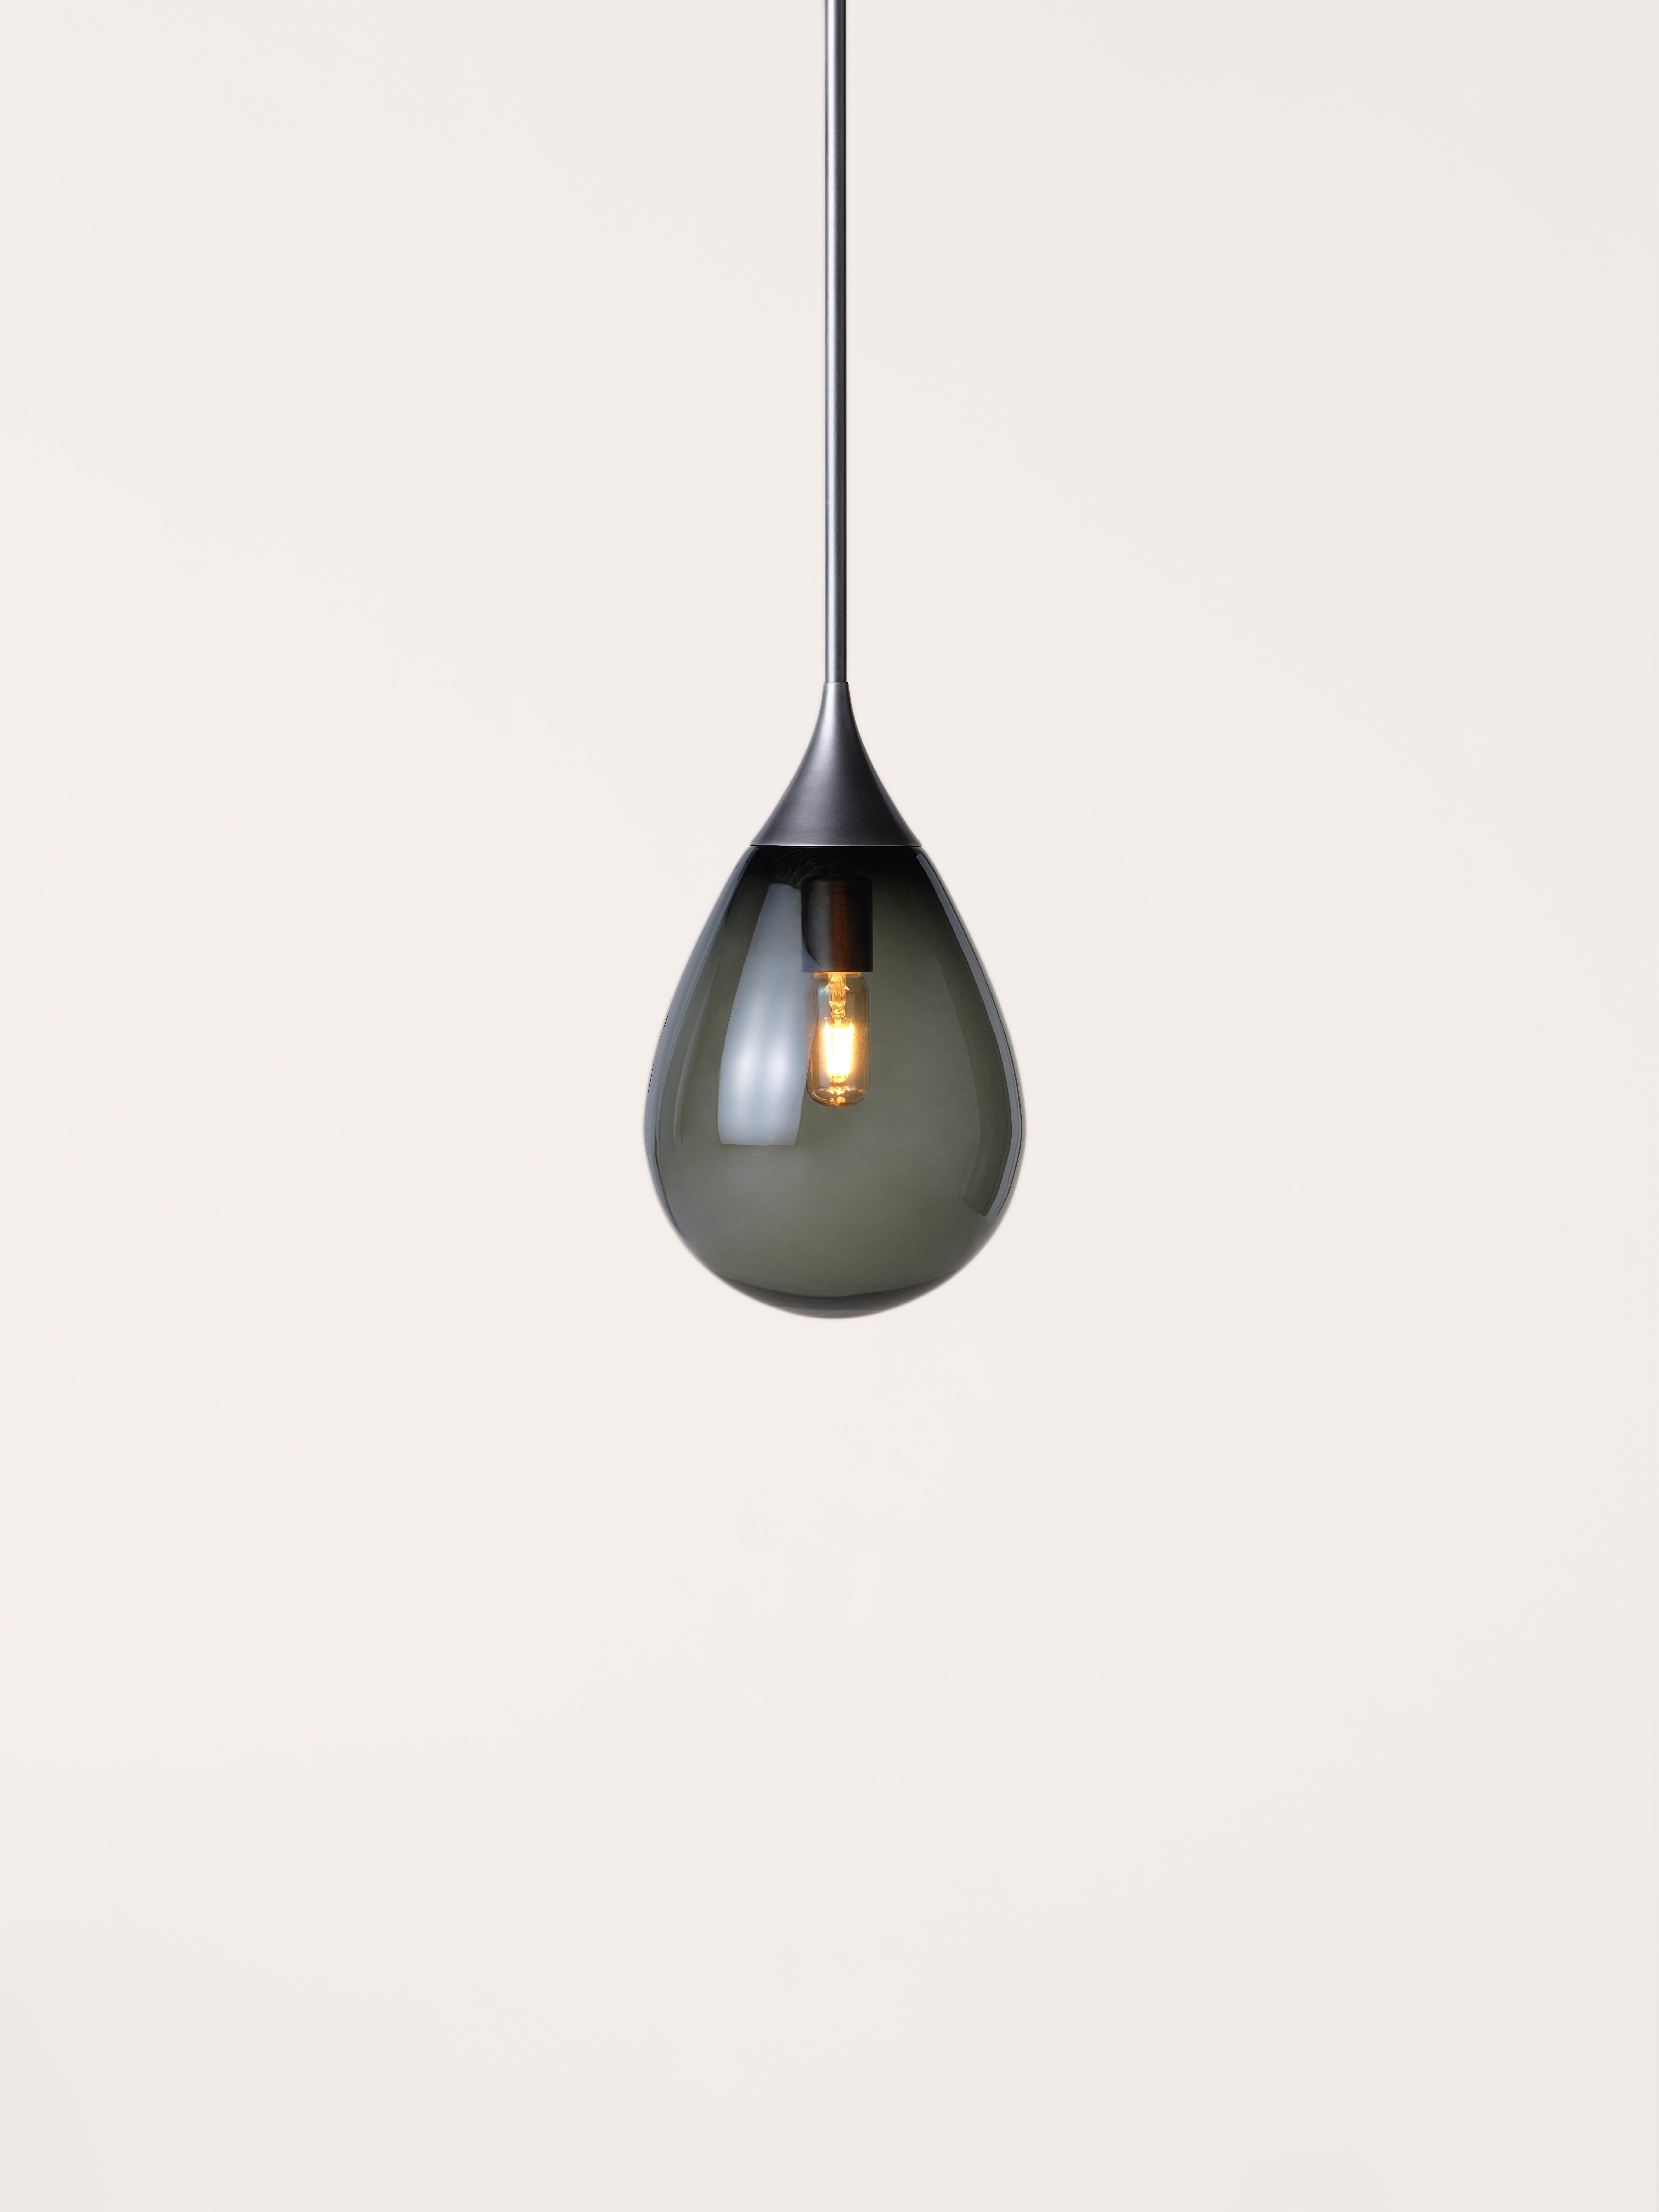 A carefully crafted, hand blown glass pendant hangs from spun brass for an elongated and elegant tear-drop shape. Also available in a smaller size, and as a cluster of three or five.

Metal finish:
Satin nickel, oil-rubbed bronze, satin brass,